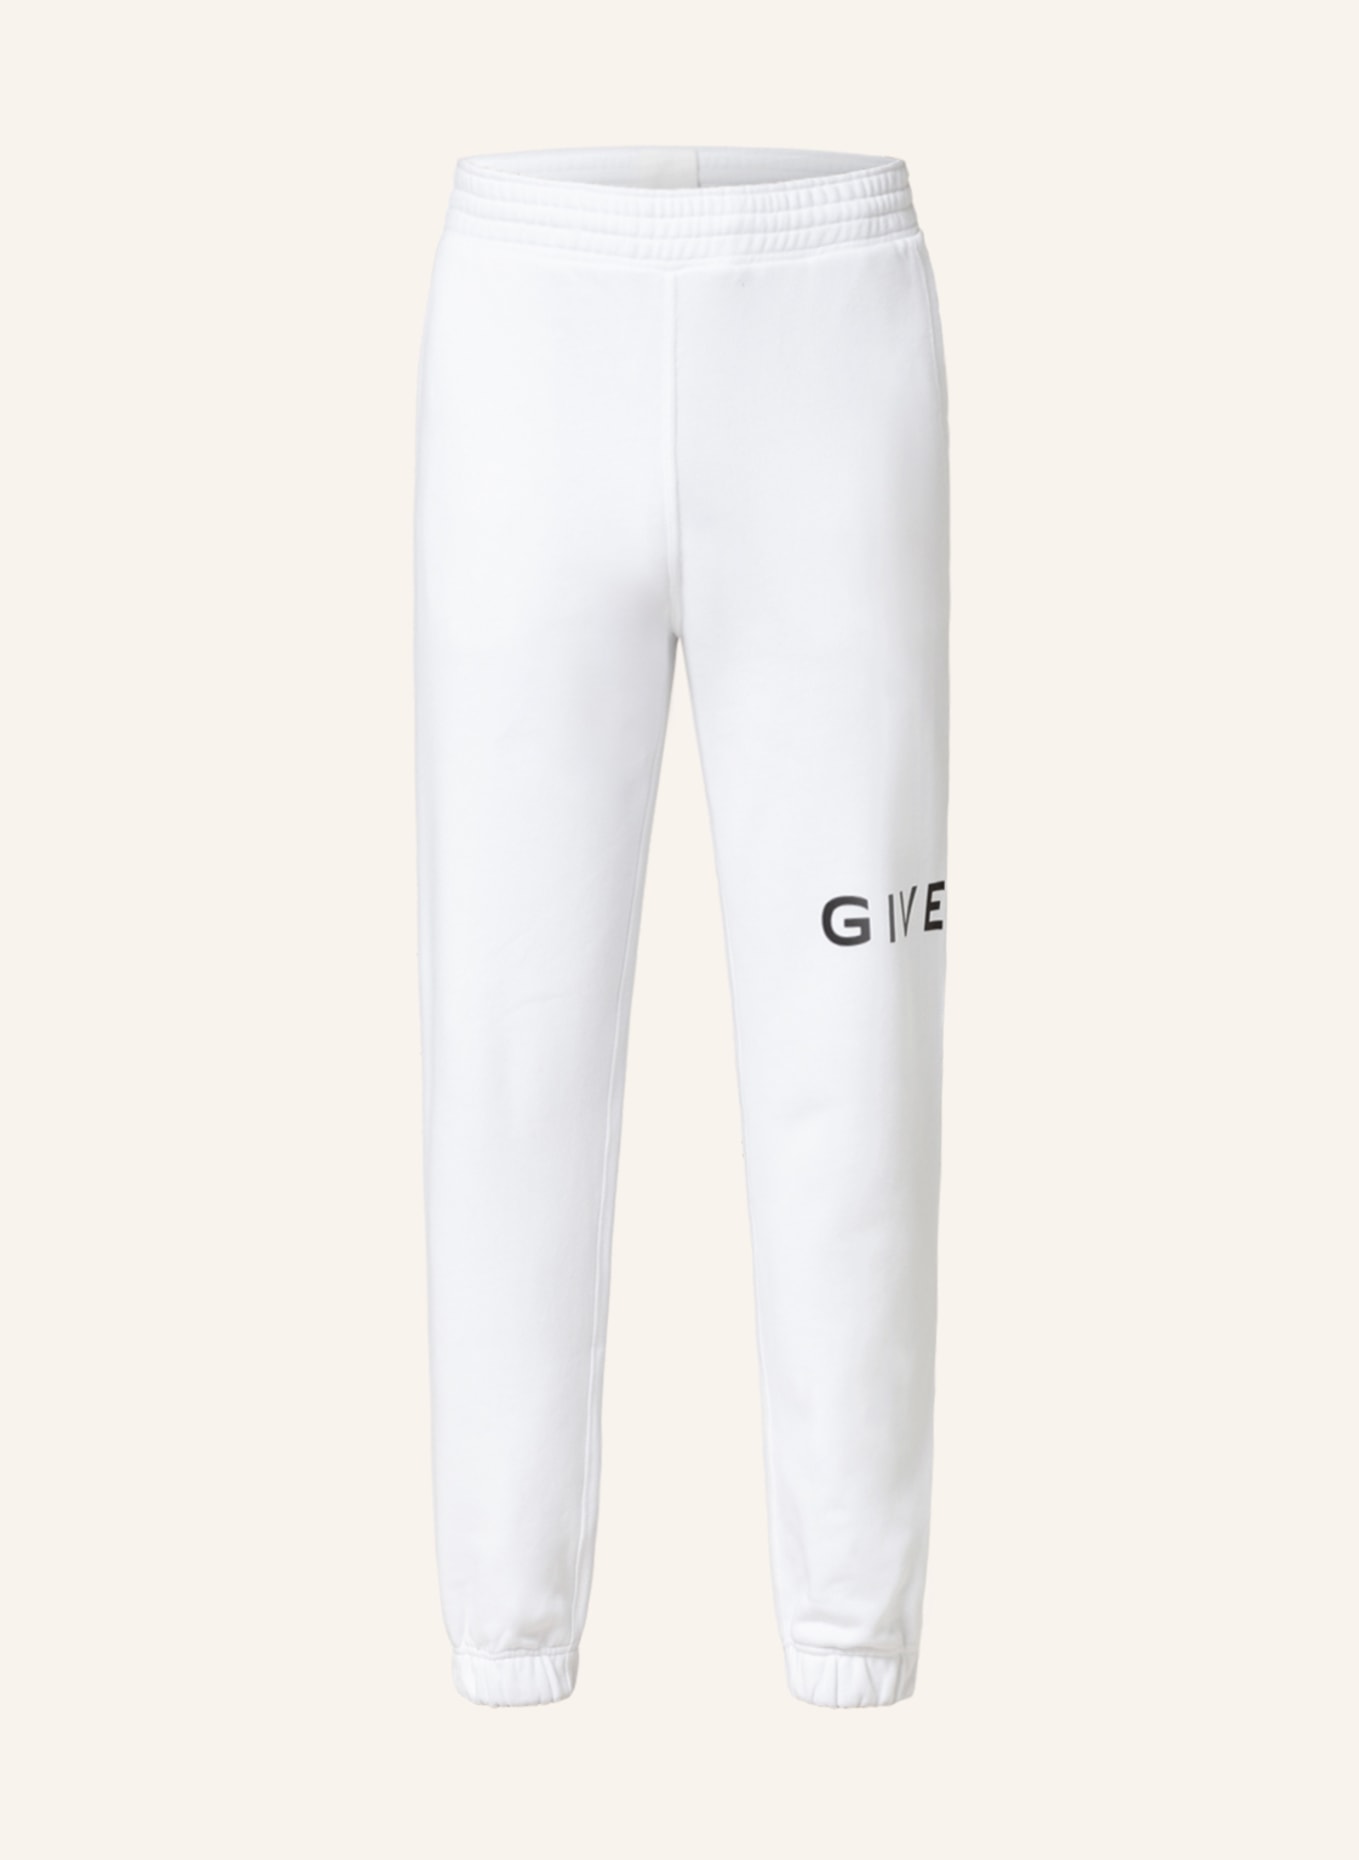 GIVENCHY Sweatpants , Farbe: WEISS (Bild 1)